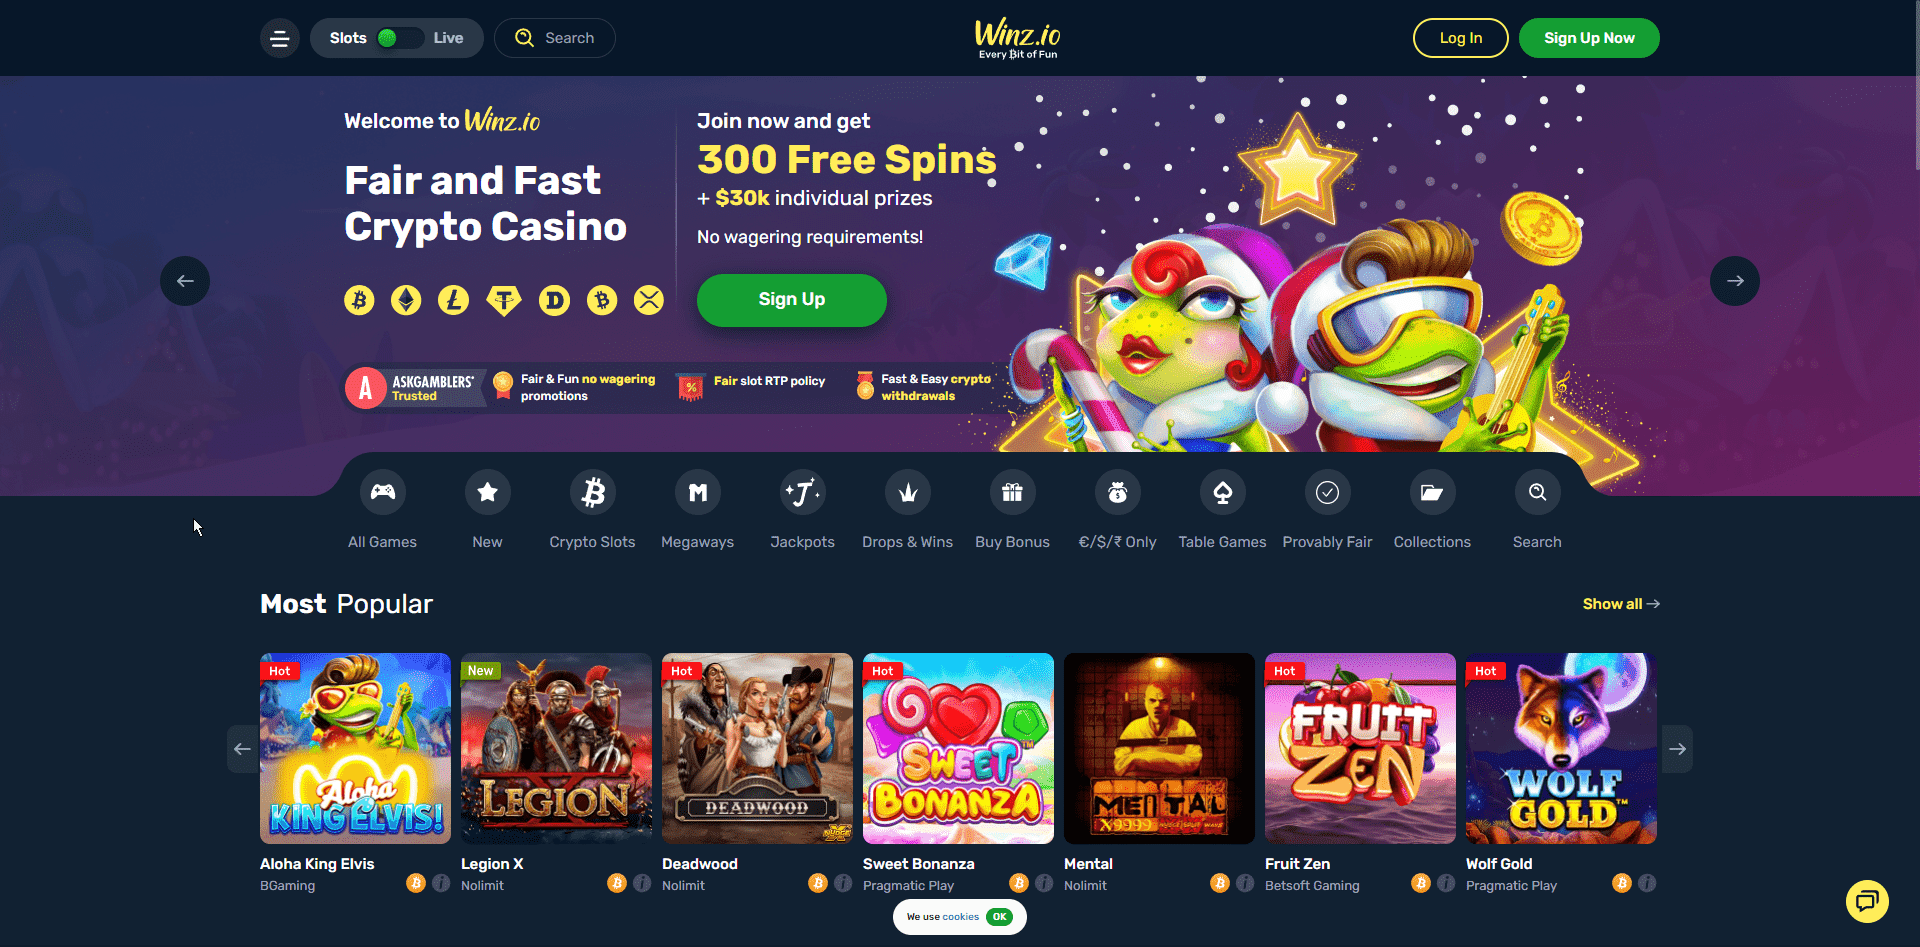 Now You Can Buy An App That is Really Made For crypto casino guides